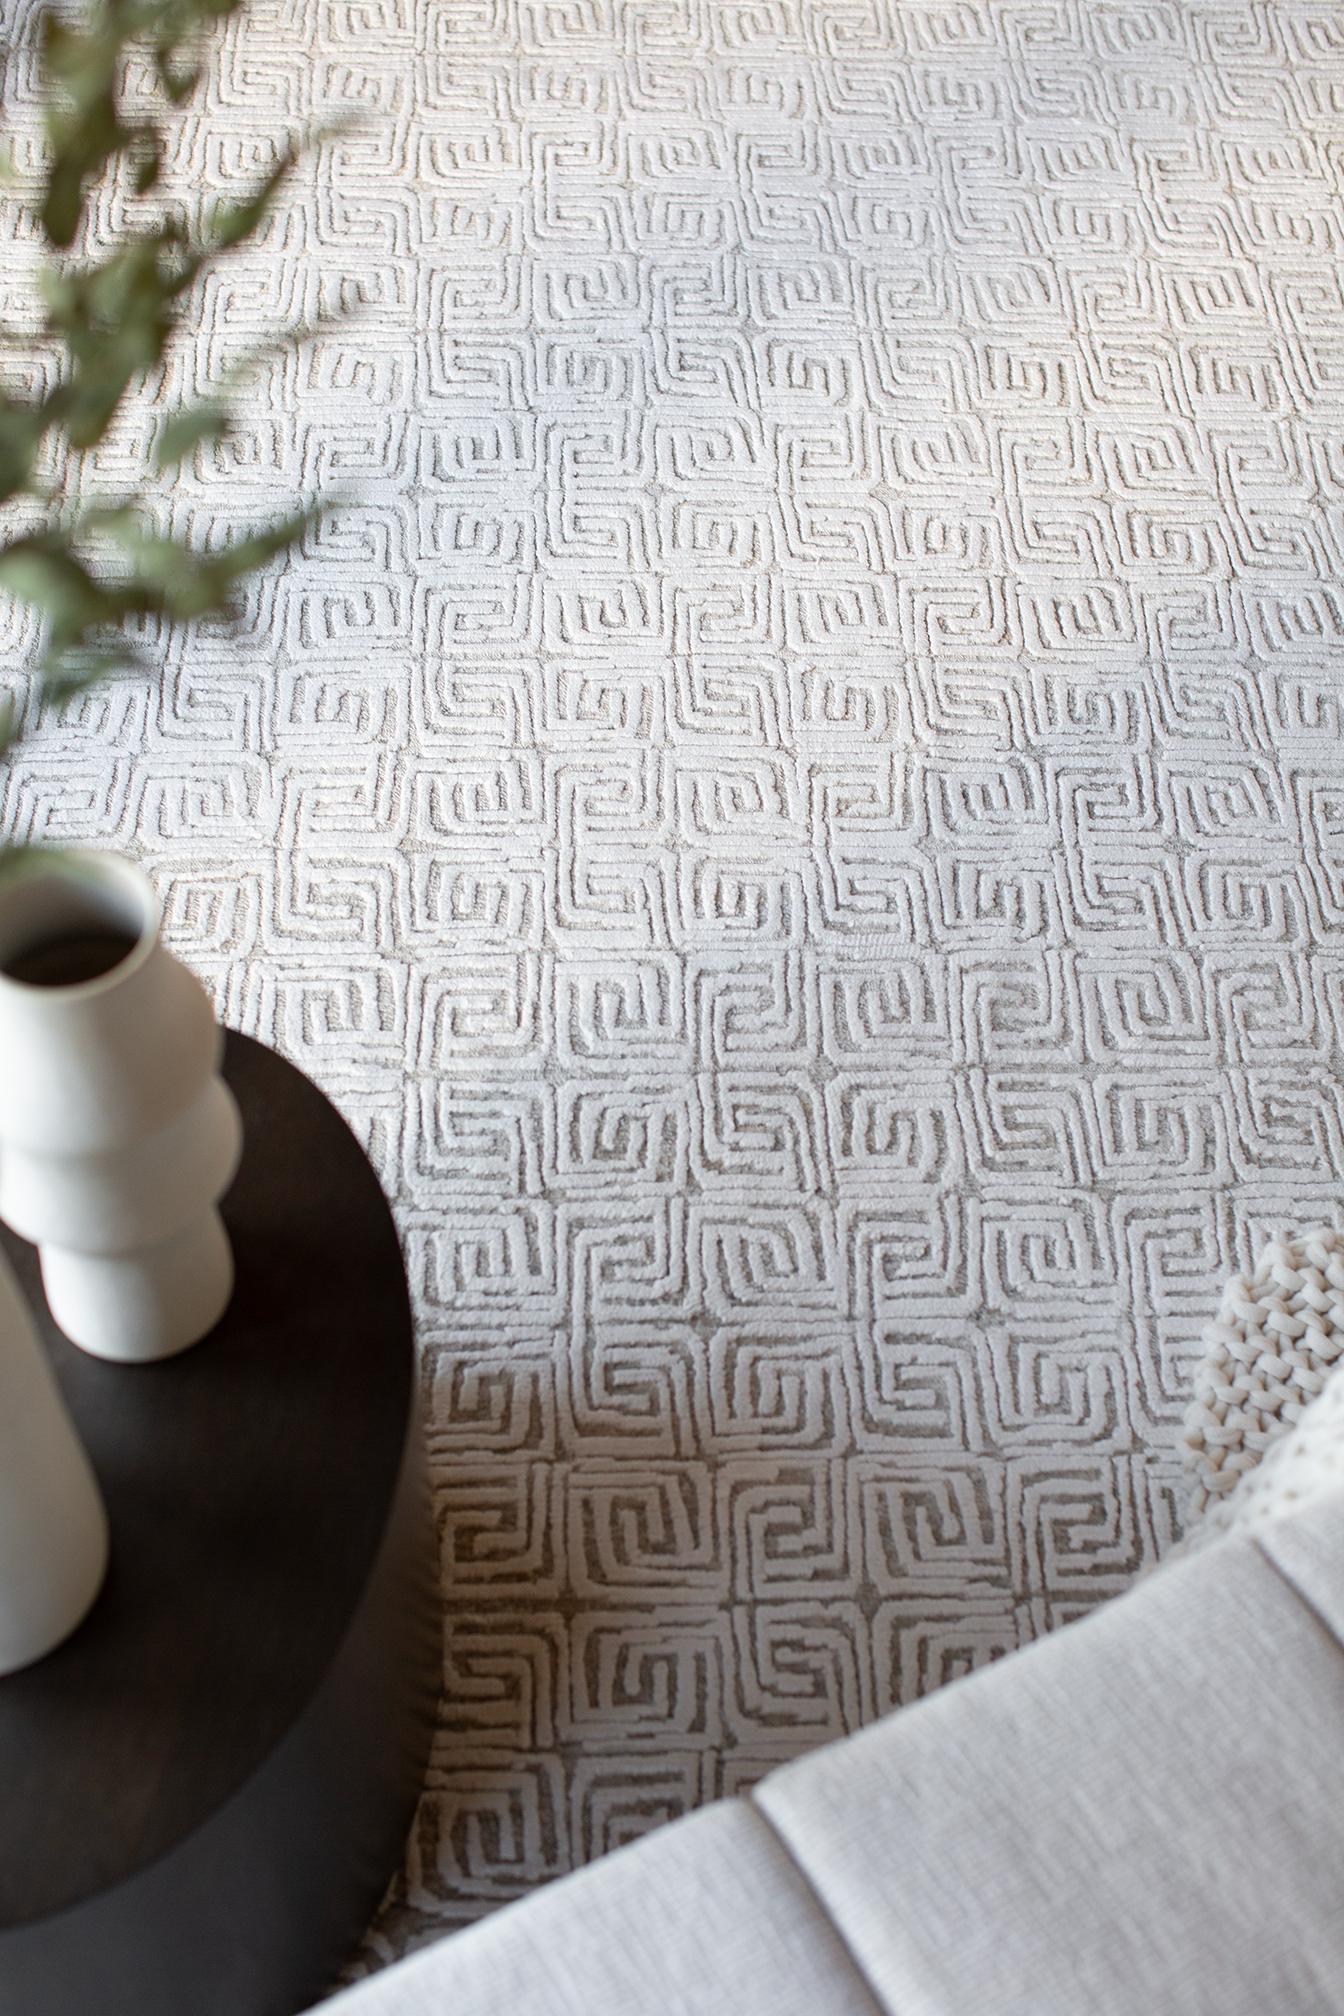 A small scale maze motif combining casual texture and trim pile.
Bright clean ivory, flecked with gray taupe tones.

Rug Number
30772
Size
8' 11